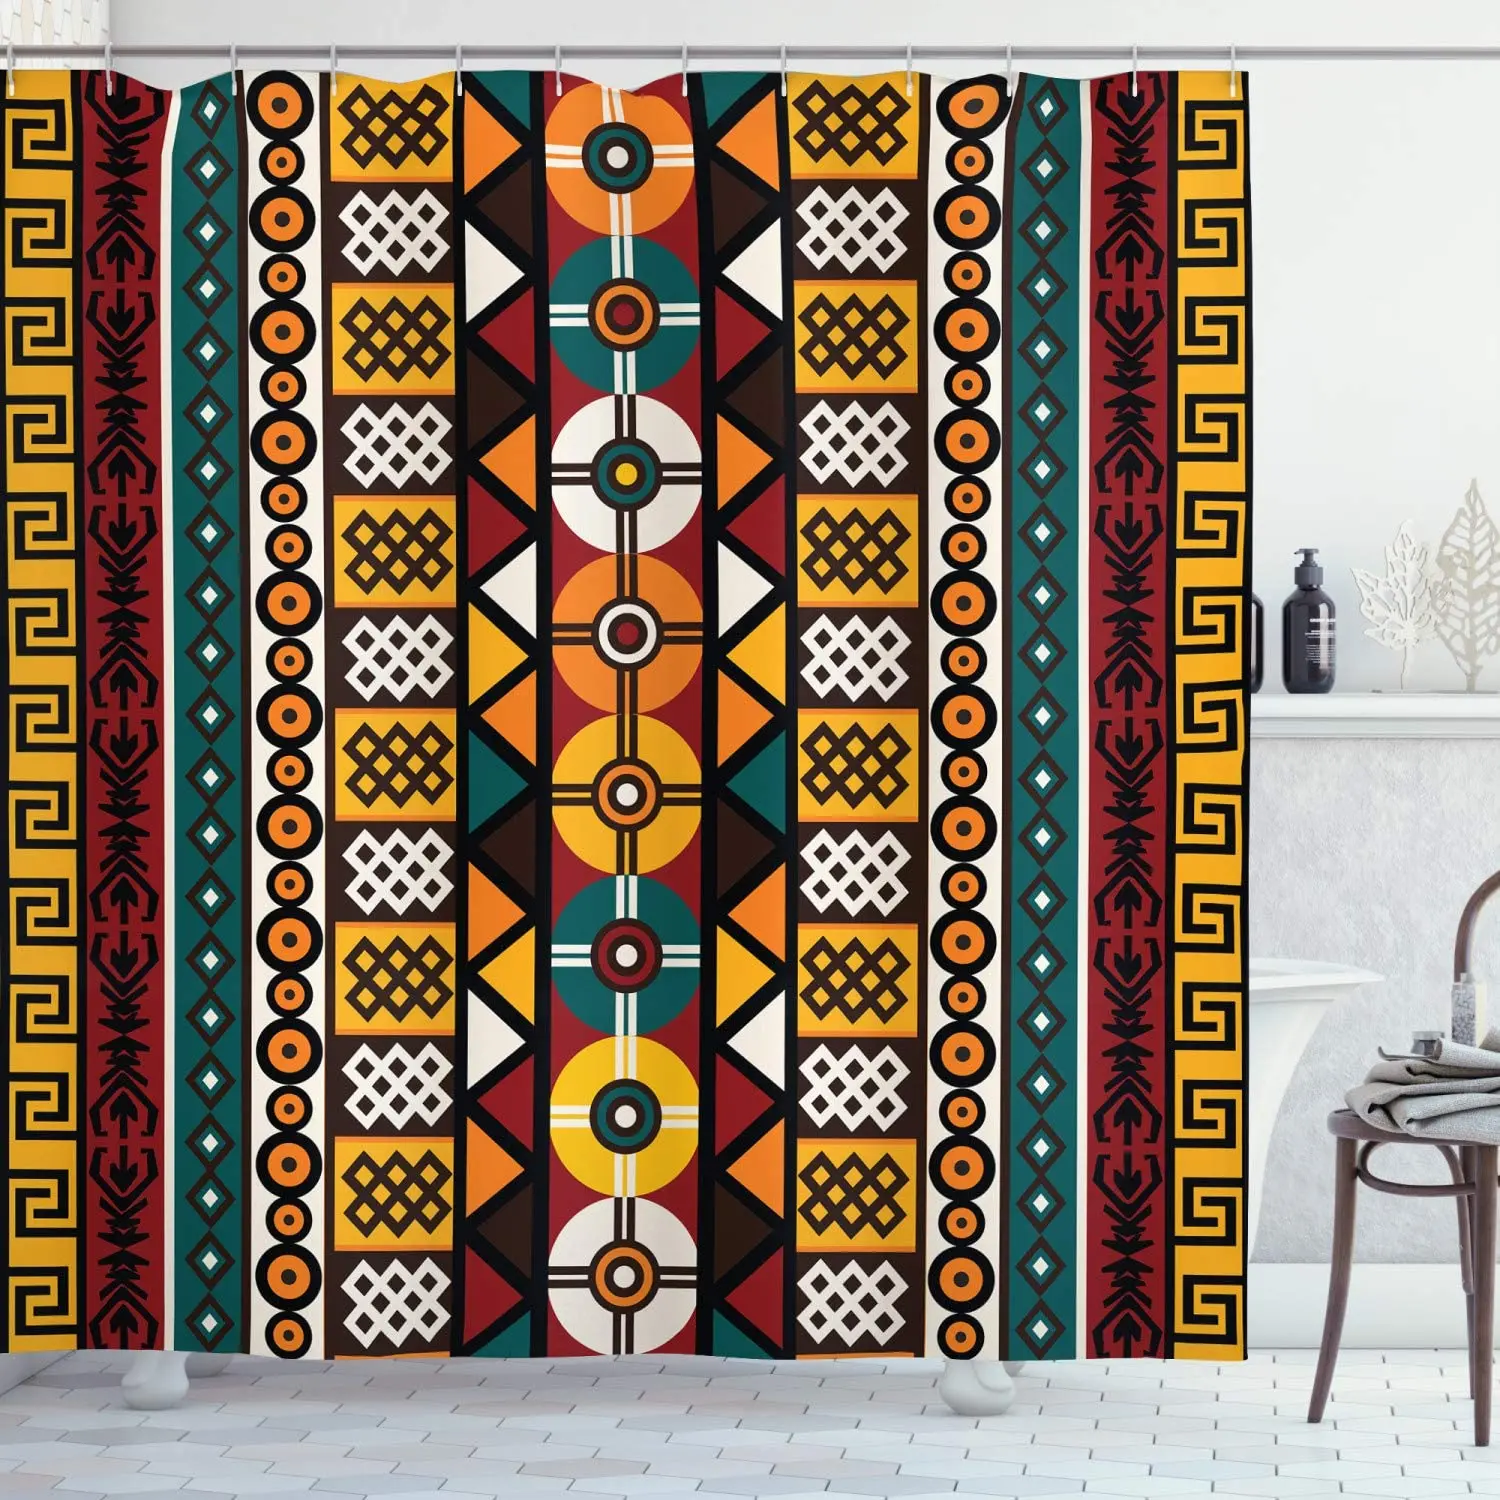 Kente Pattern Shower Curtains Vertical Borders Inspired by Timeless Cultures Geometrical Design Modern Fabric Bathroom Decor Set